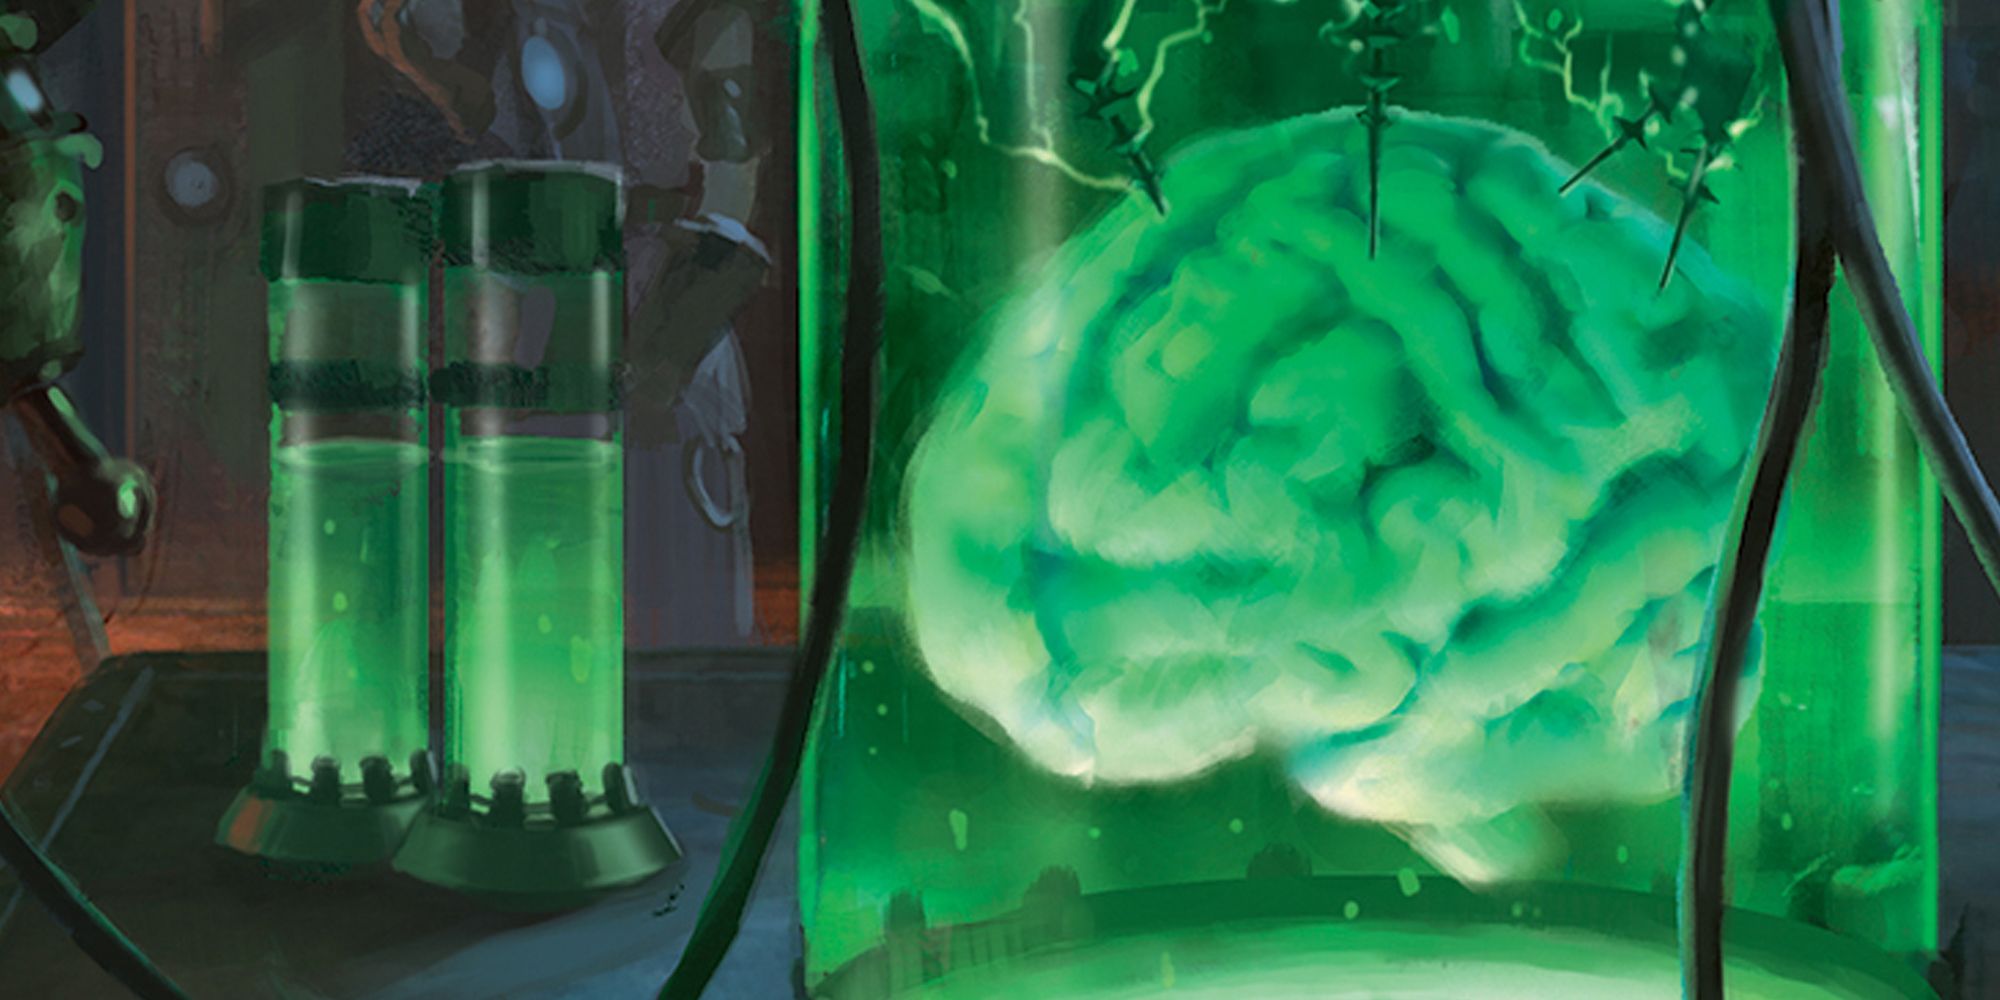 dungeons and dragons - brain in a jar official art wizards of the coast llc 2016